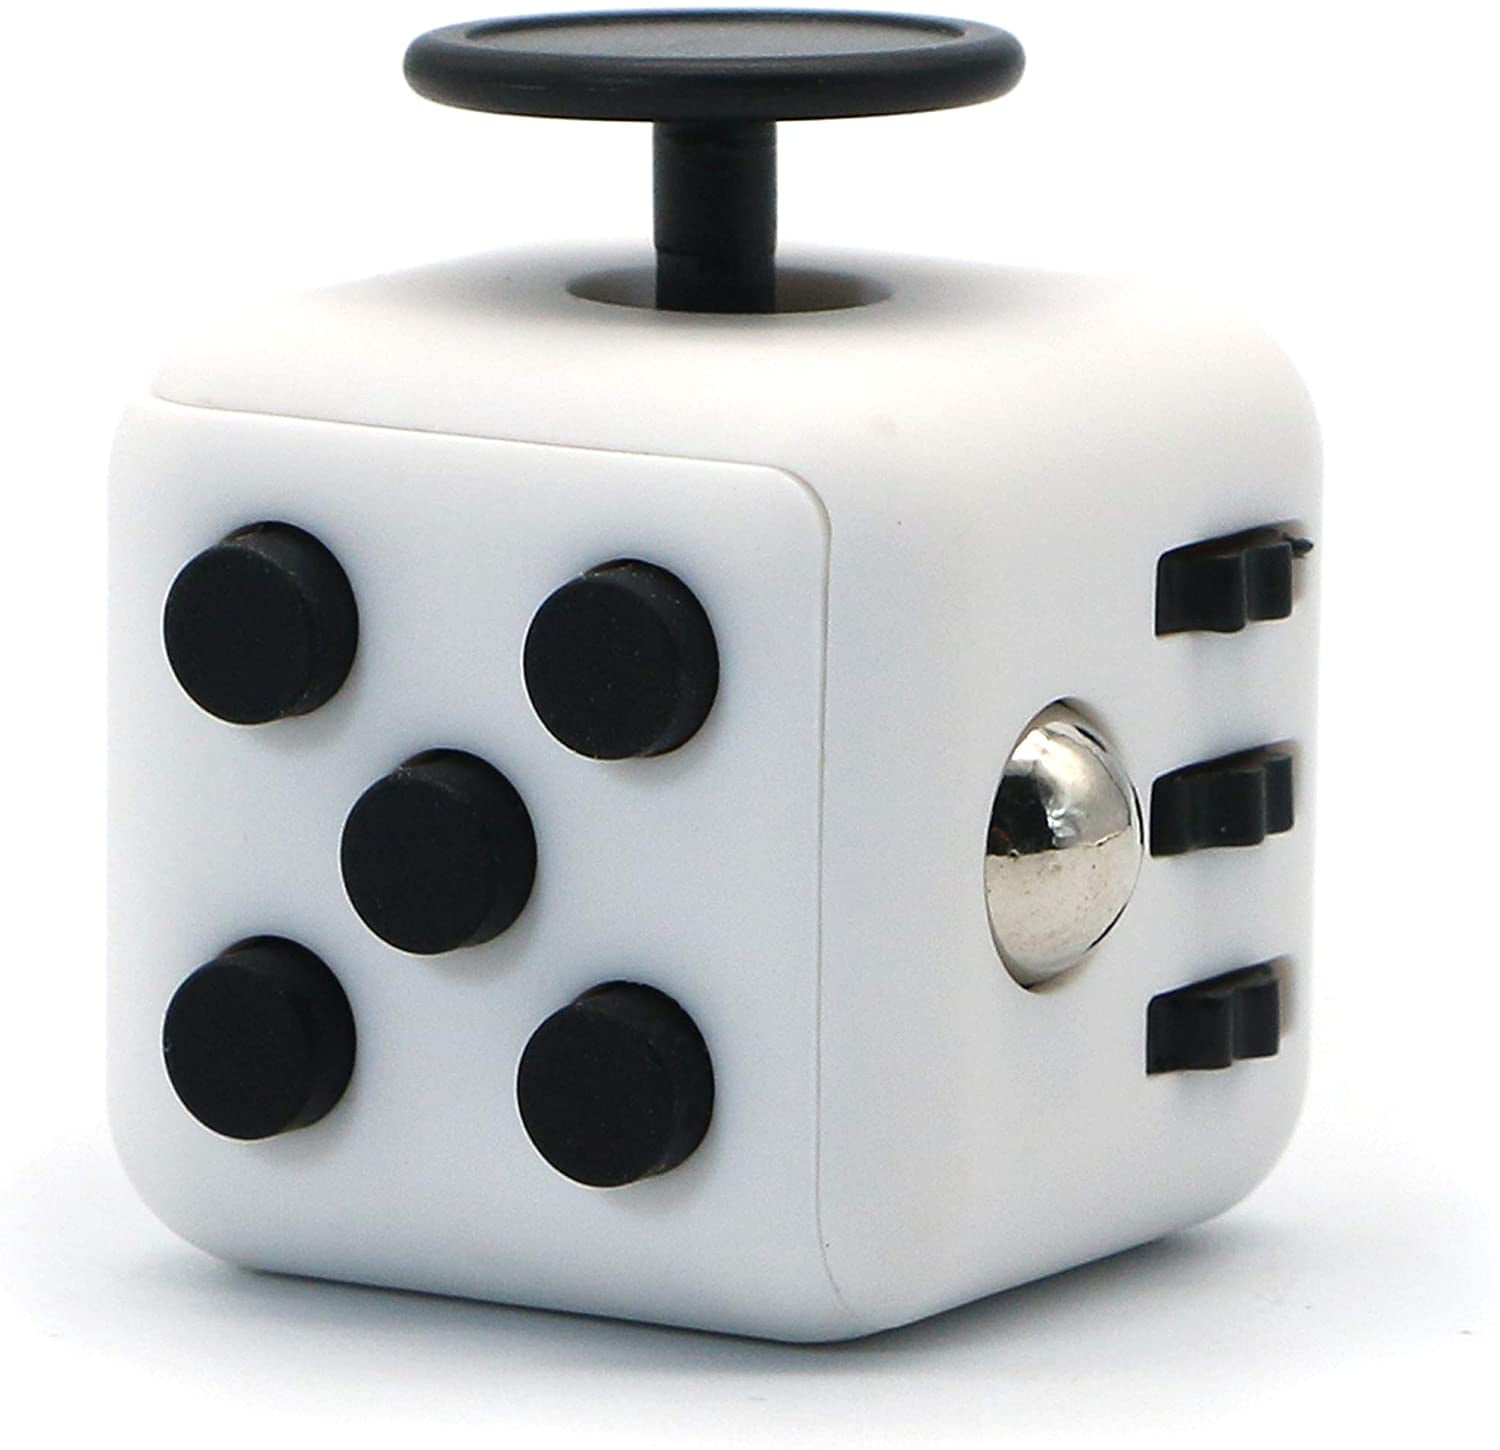 Details about   Fidget Cube Kids12 Side Fidget Toy Relieves Stress Anxiety Relax Children Adults 